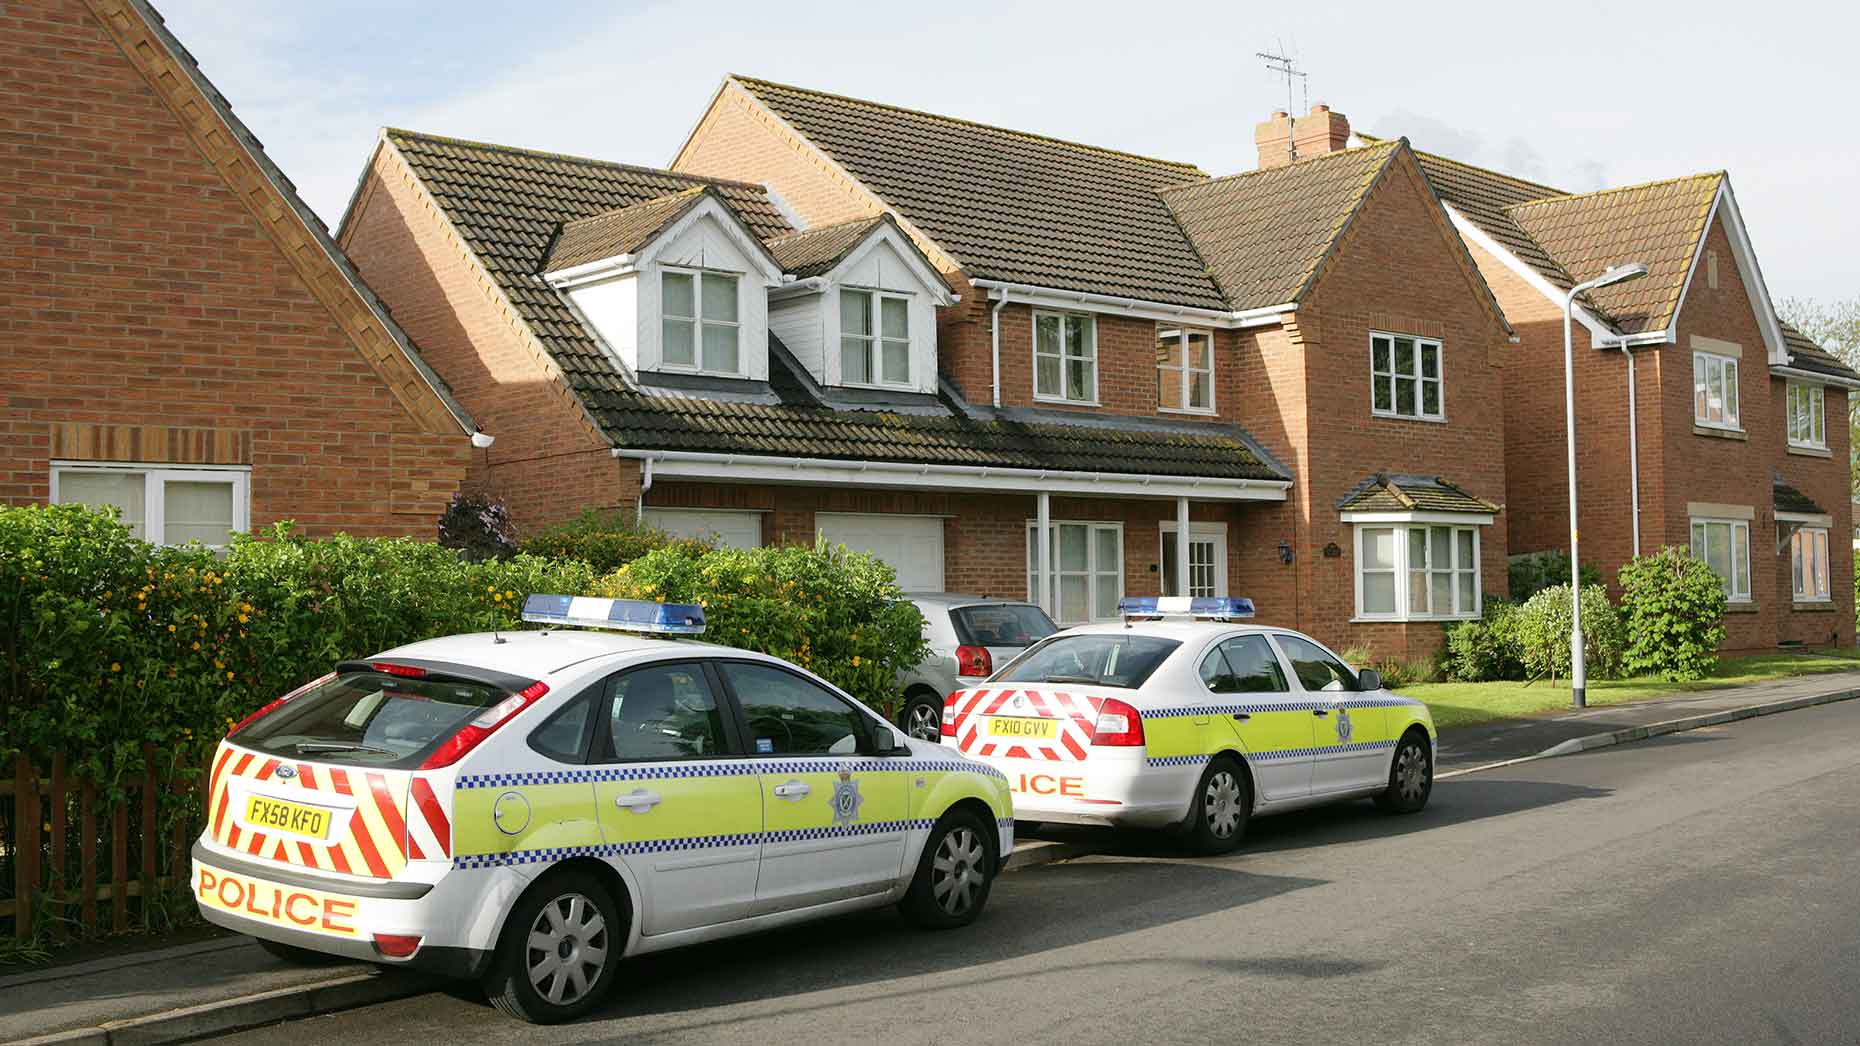 The house in Hotchkin Avenue in Saxilby, near Lincoln, raided by police on Thursday, May 23. Photo: Steve Hill